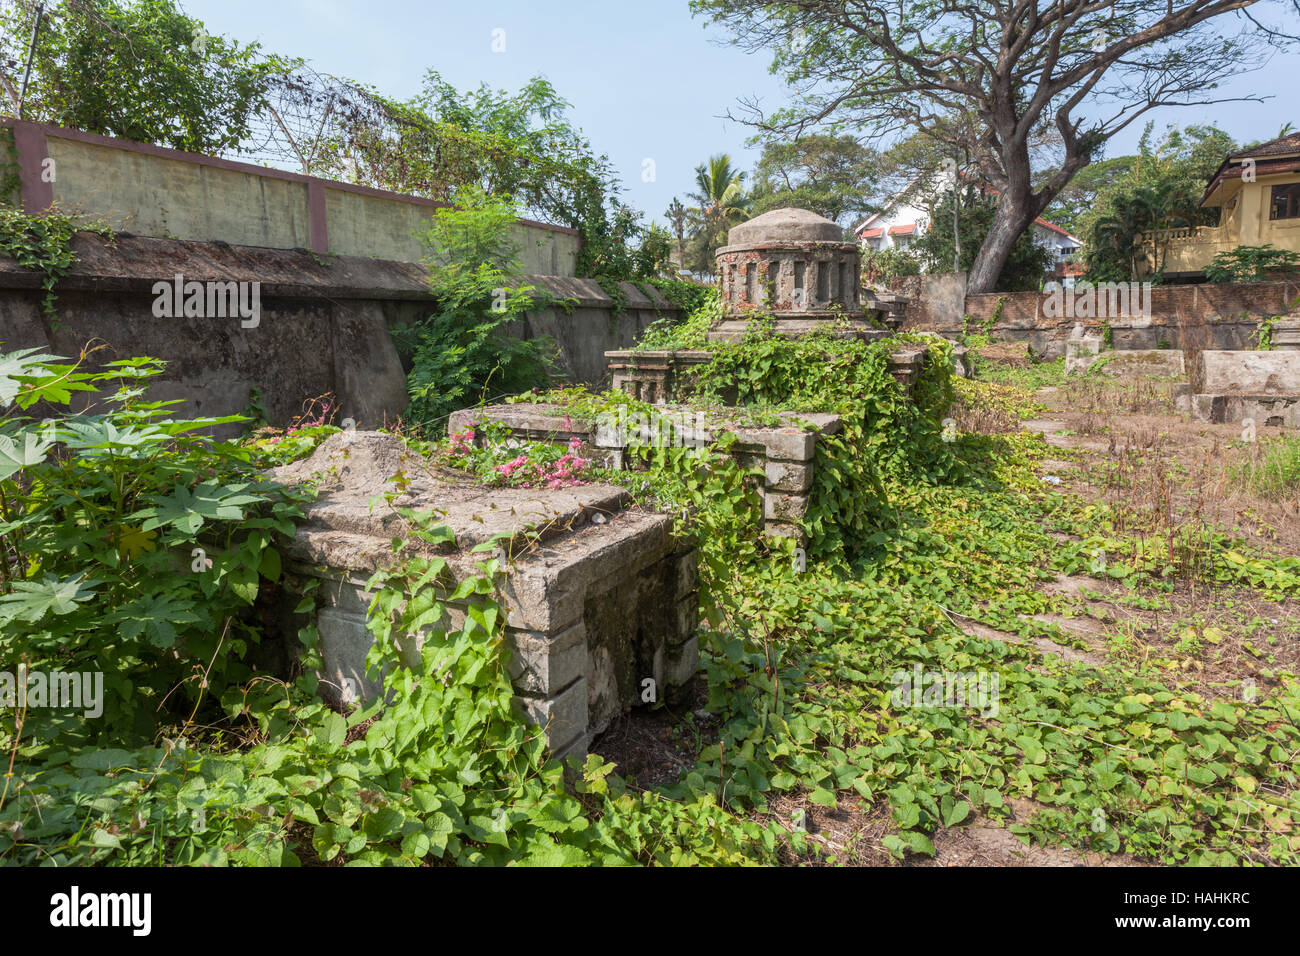 The Dutch cemetery, Kochi (Cochin), India,built in the style of the Dutch architecture of the time, is surrounded by walls and t Stock Photo